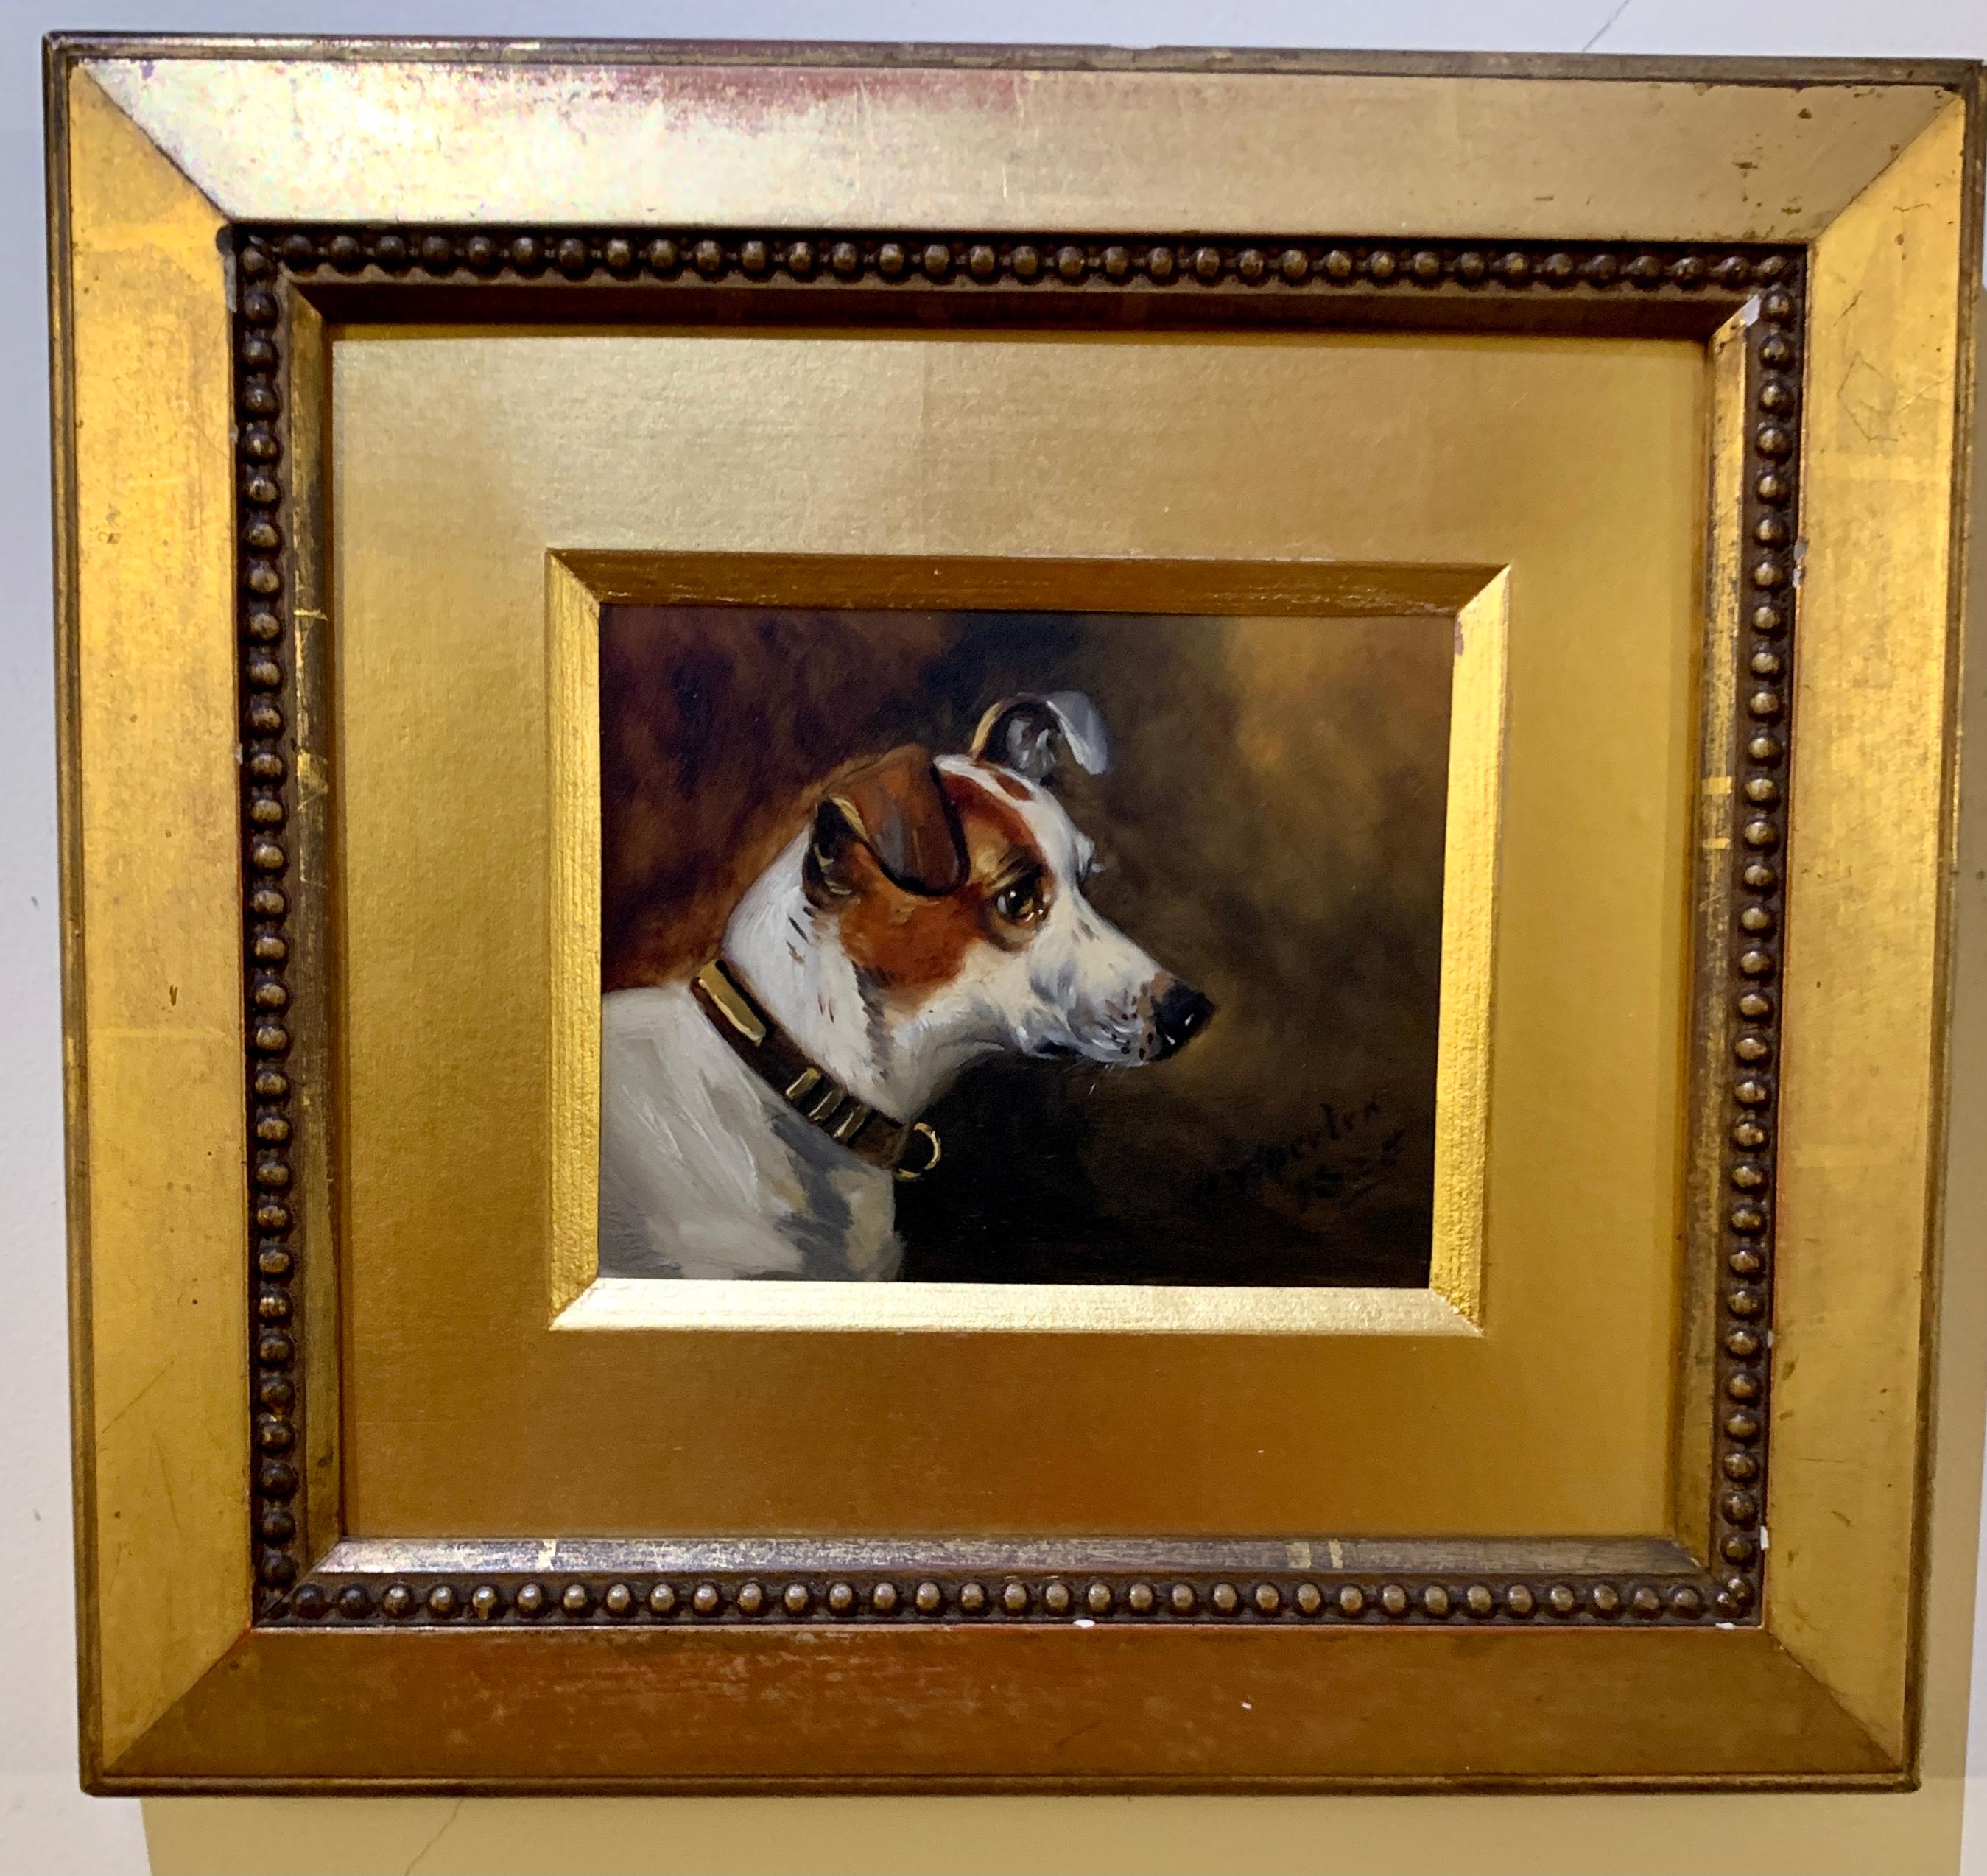 Alfred Wheeler Portrait Painting - Victorian English 19th century portrait of a Jack Russell dog.